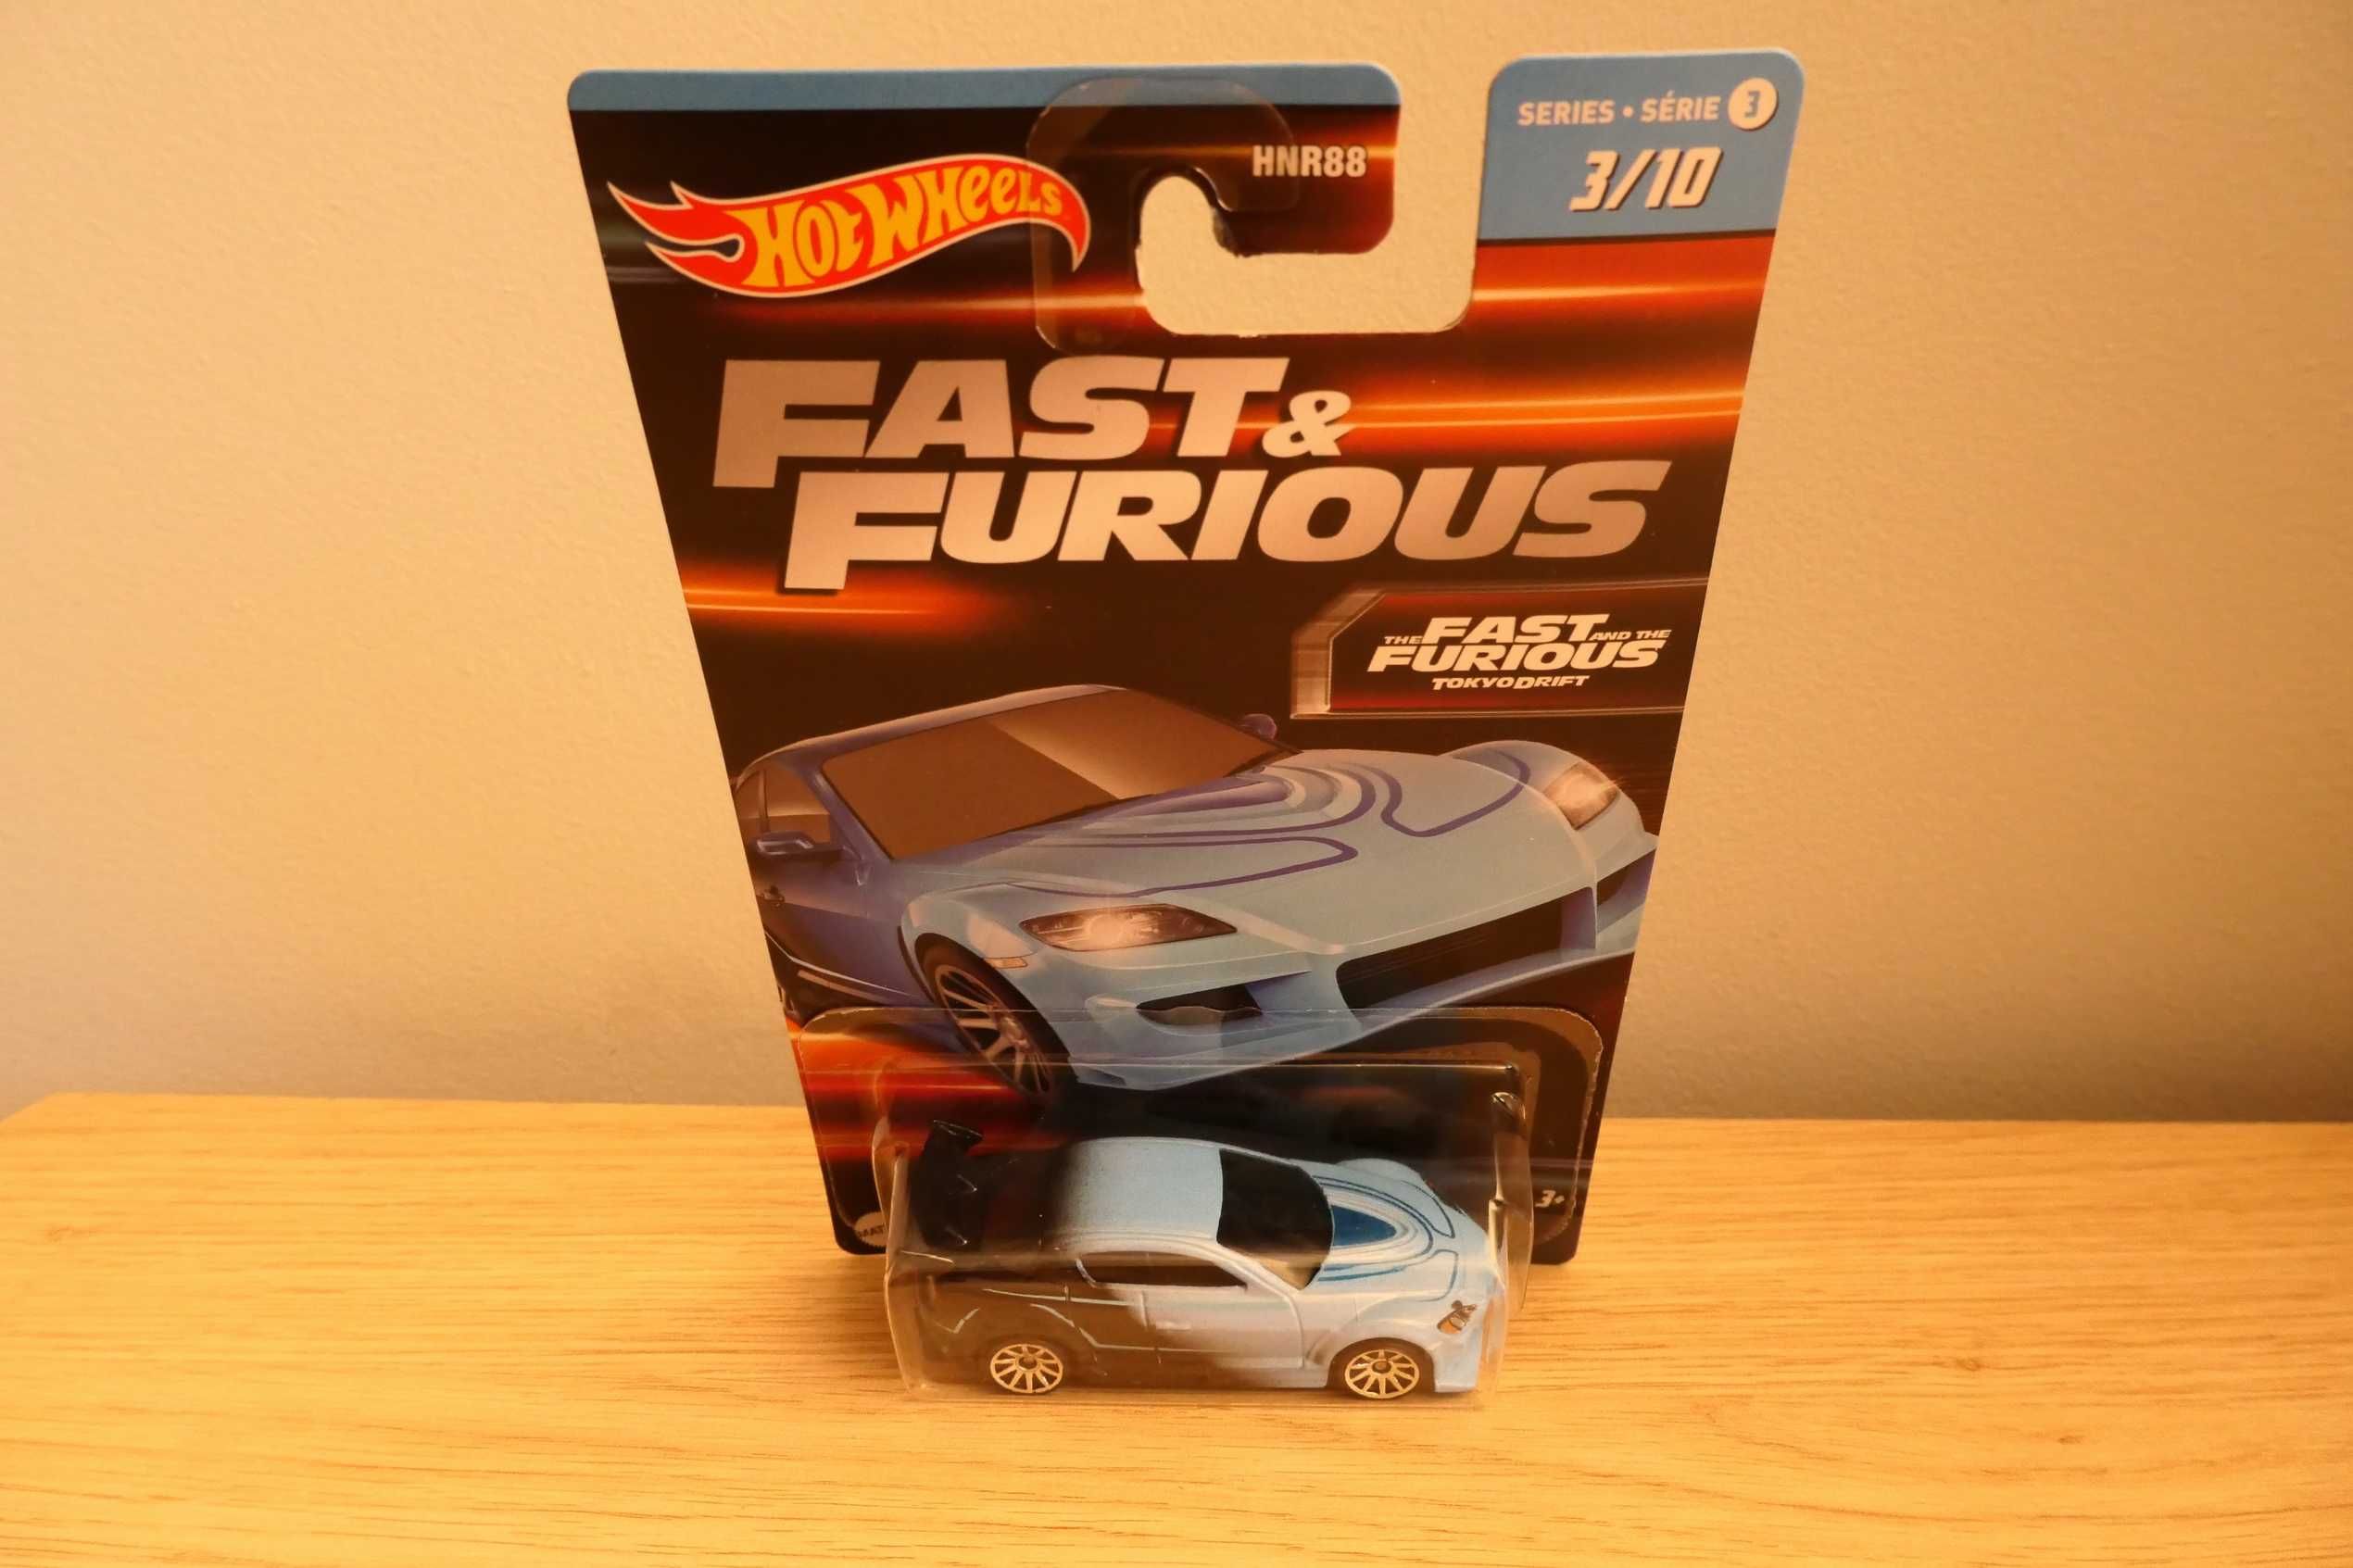 Mazda RX-8 - Fast and Furious - Hot Wheels